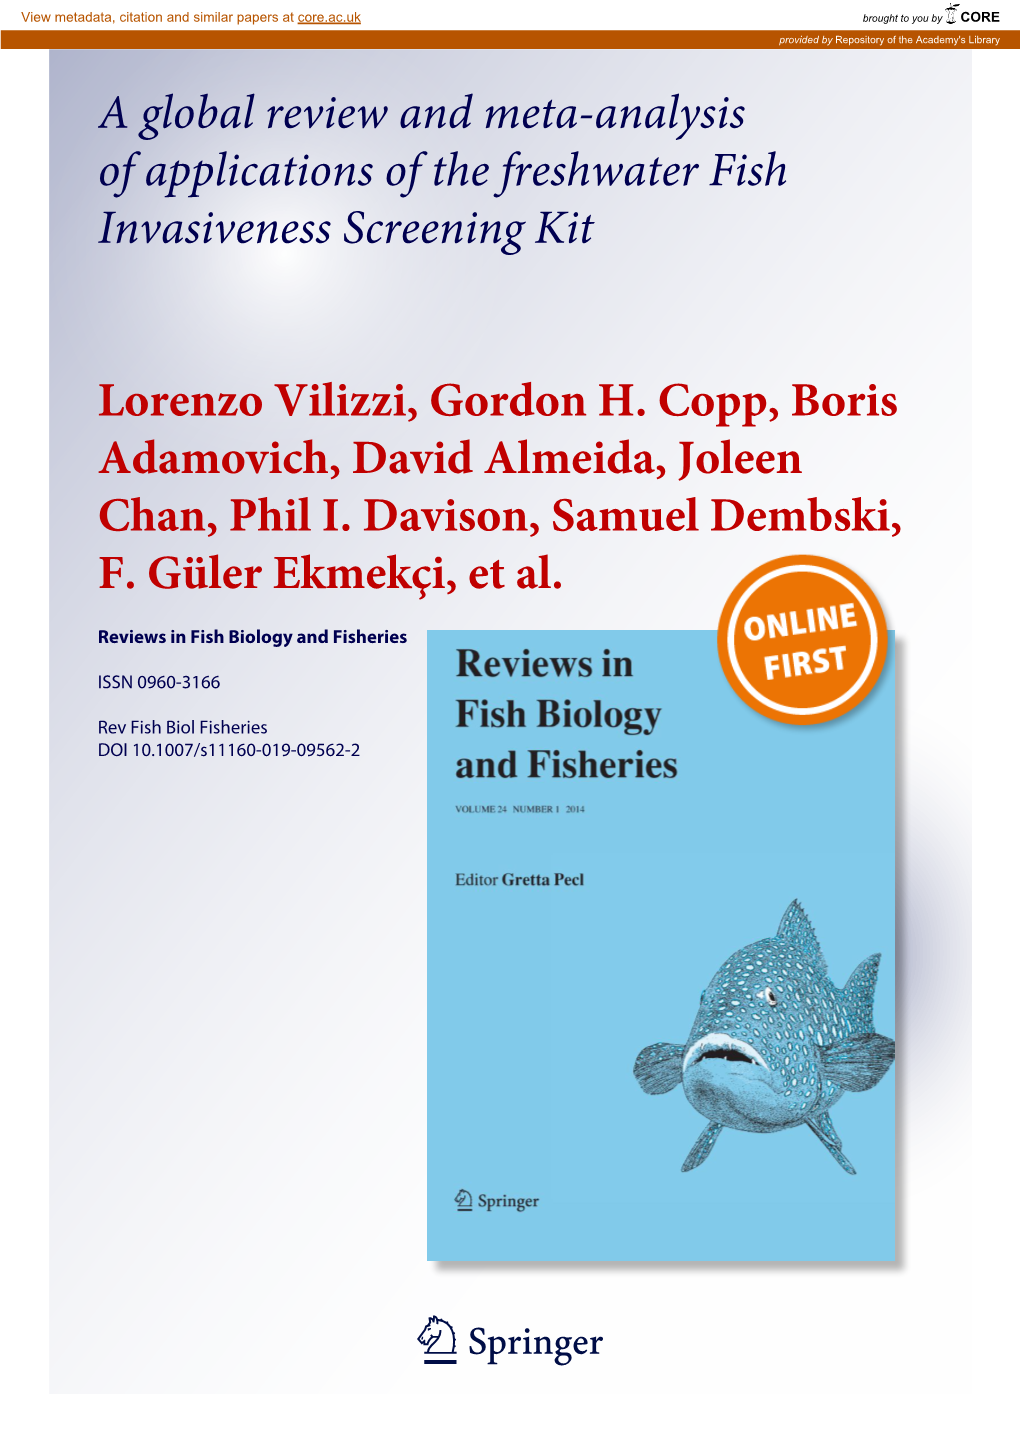 A Global Review and Meta-Analysis of Applications of the Freshwater Fish Invasiveness Screening Kit